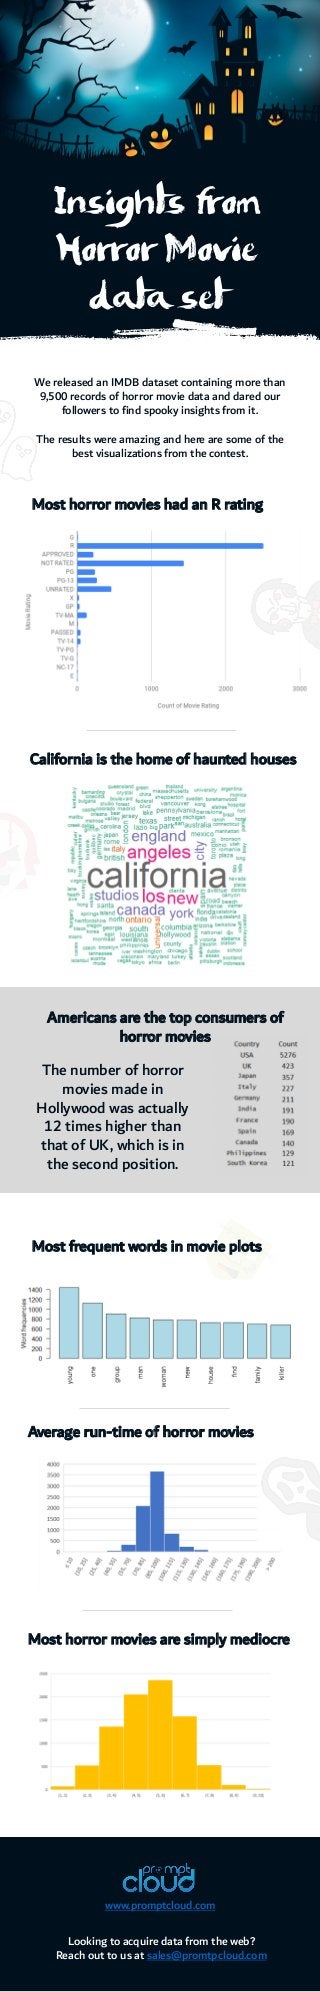 Insights from
Horror Movie
data set
We released an IMDB dataset containing more than
9,500 records of horror movie data and dared our
followers to find spooky insights from it.
The results were amazing and here are some of the
best visualizations from the contest.
Most horror movies had an R rating
California is the home of haunted houses
Americans are the top consumers of
horror movies
The number of horror
movies made in
Hollywood was actually
12 times higher than
that of UK, which is in
the second position.
Most frequent words in movie plots
Average run-time of horror movies
Most horror movies are simply mediocre
Looking to acquire data from the web?
Reach out to us at sales@promtpcloud.com
www.promptcloud.com
 